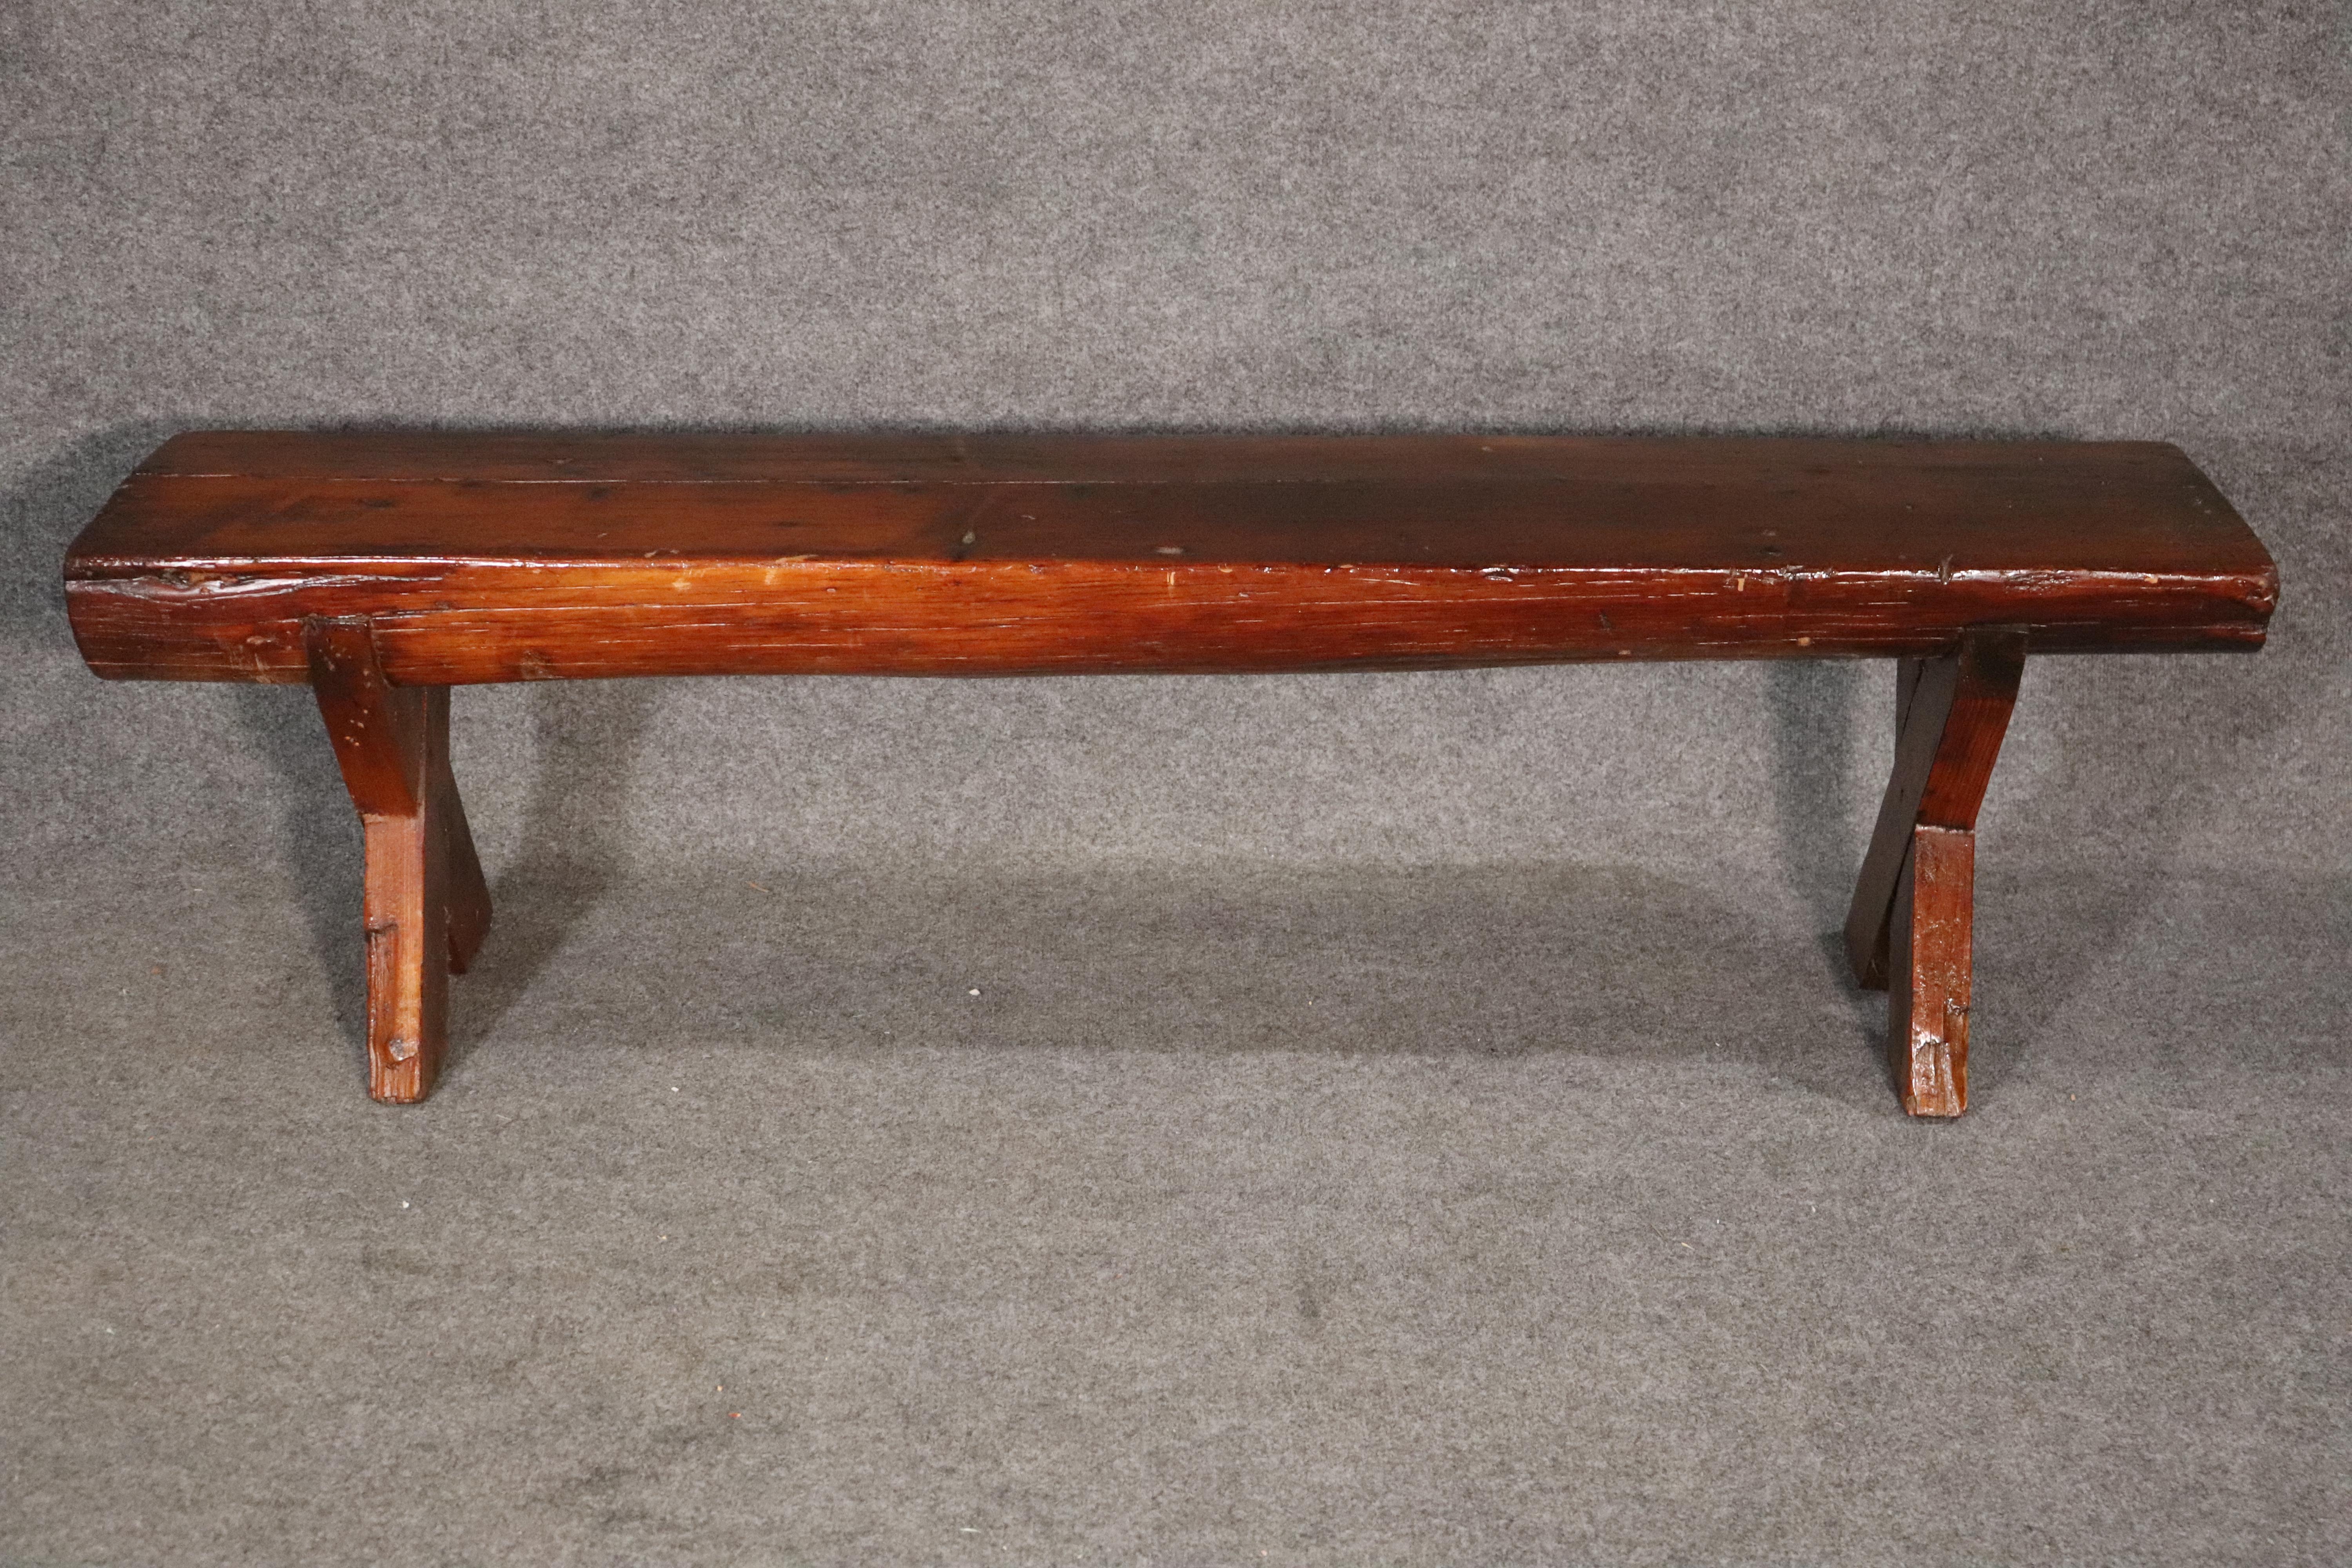 Long 5 foot wood bench with criss-cross legs. Created by hand using a half log set on sturdy x-frame legs. Great for use indoor or outside.
Please confirm location NY or NJ.